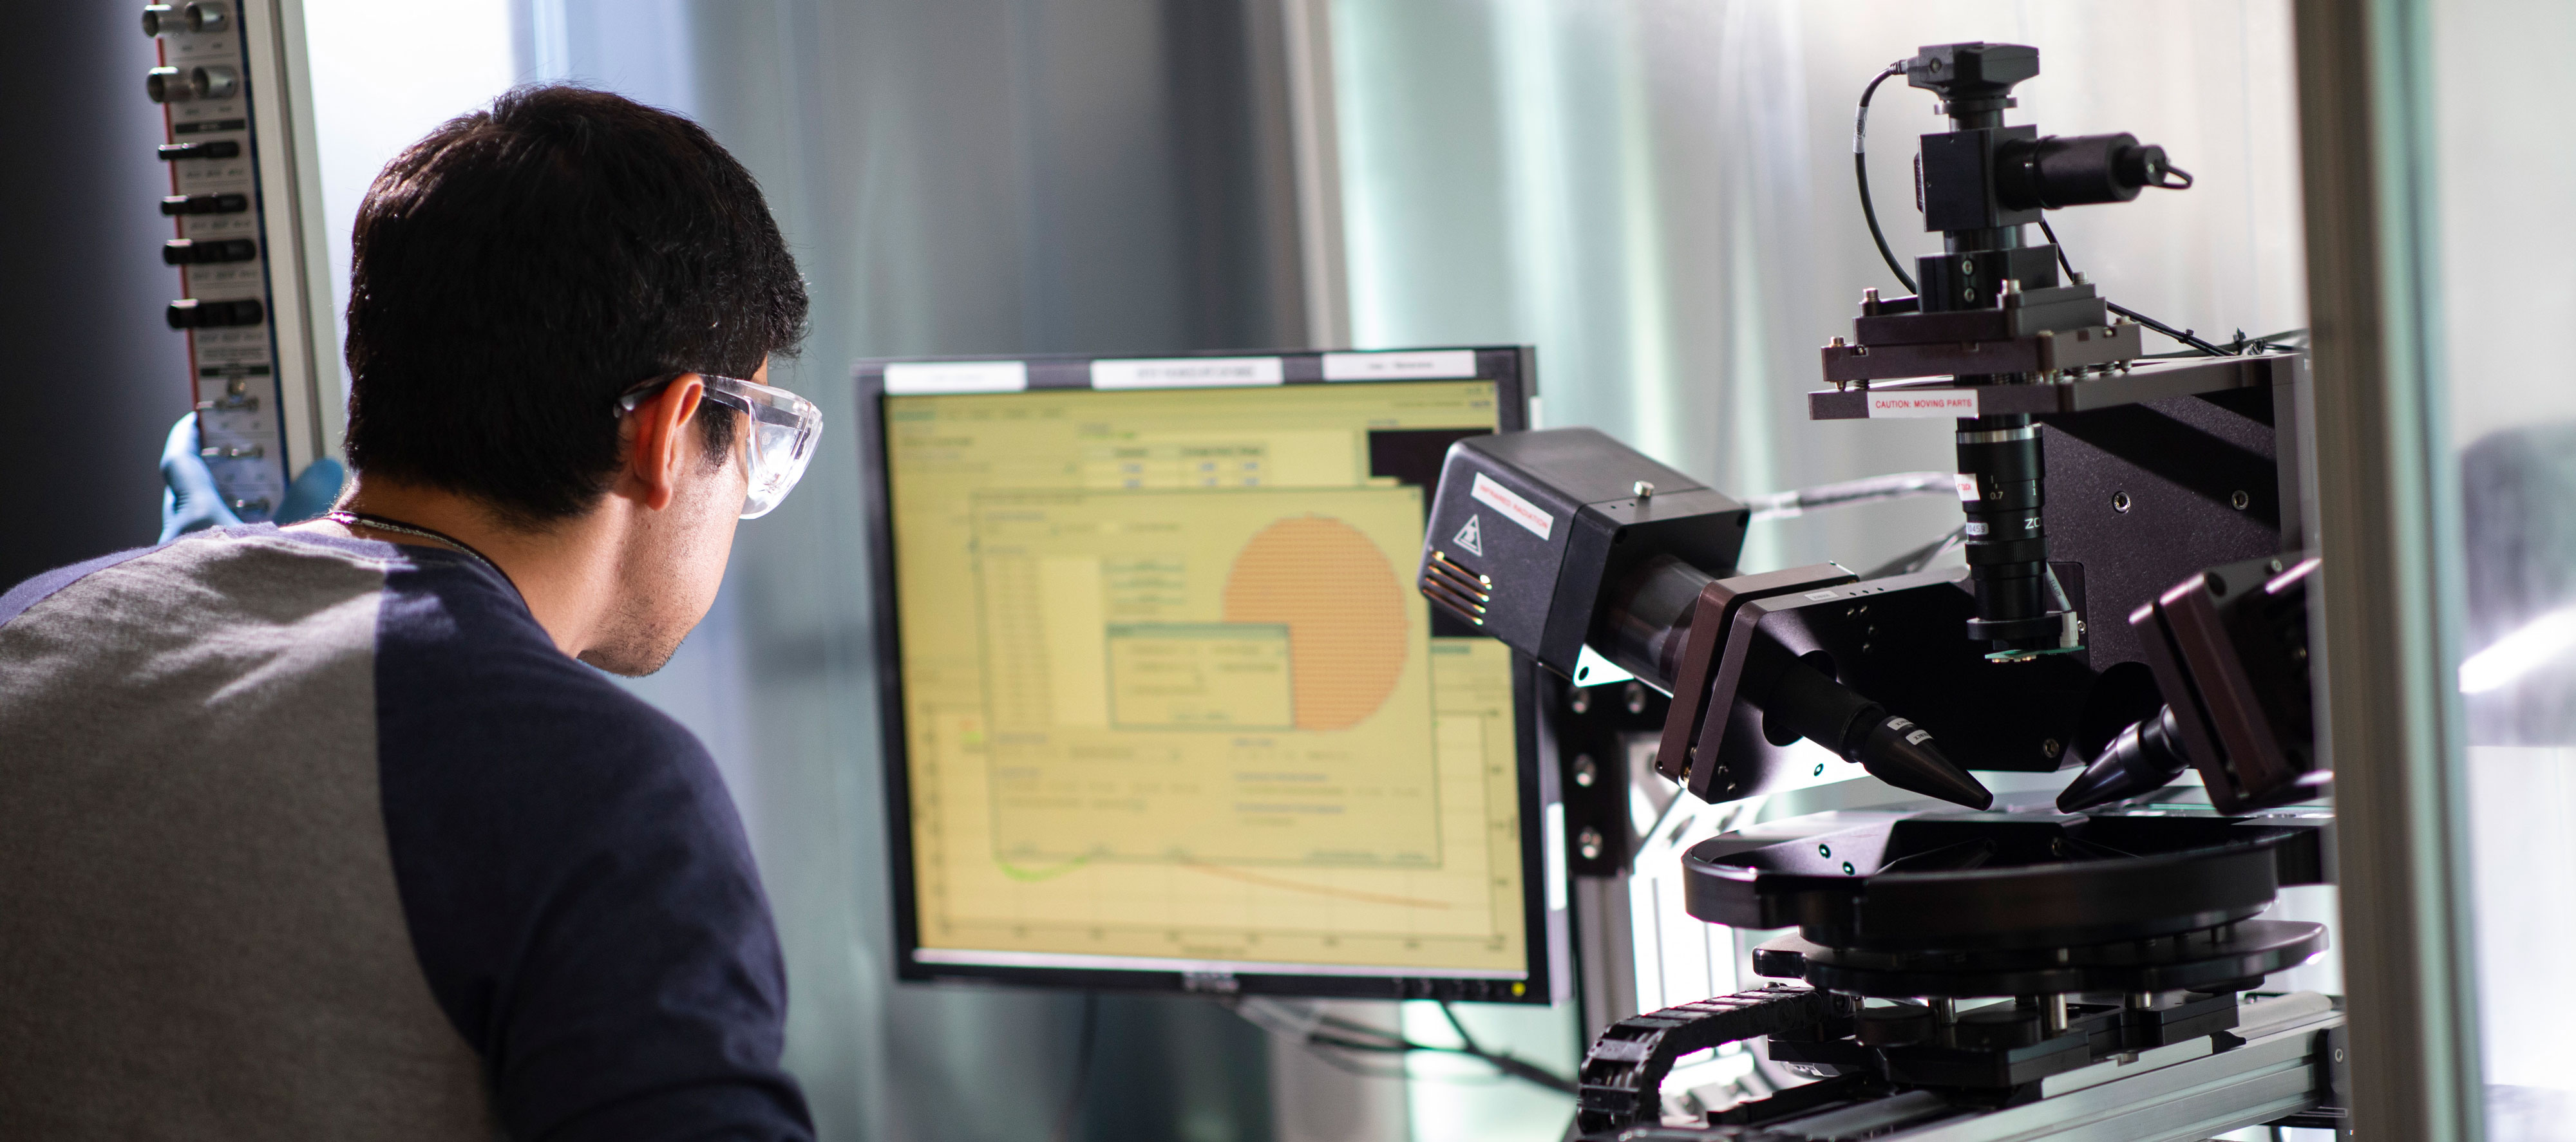 A researcher in safety glasses leans over a computer situated beside research equipment.